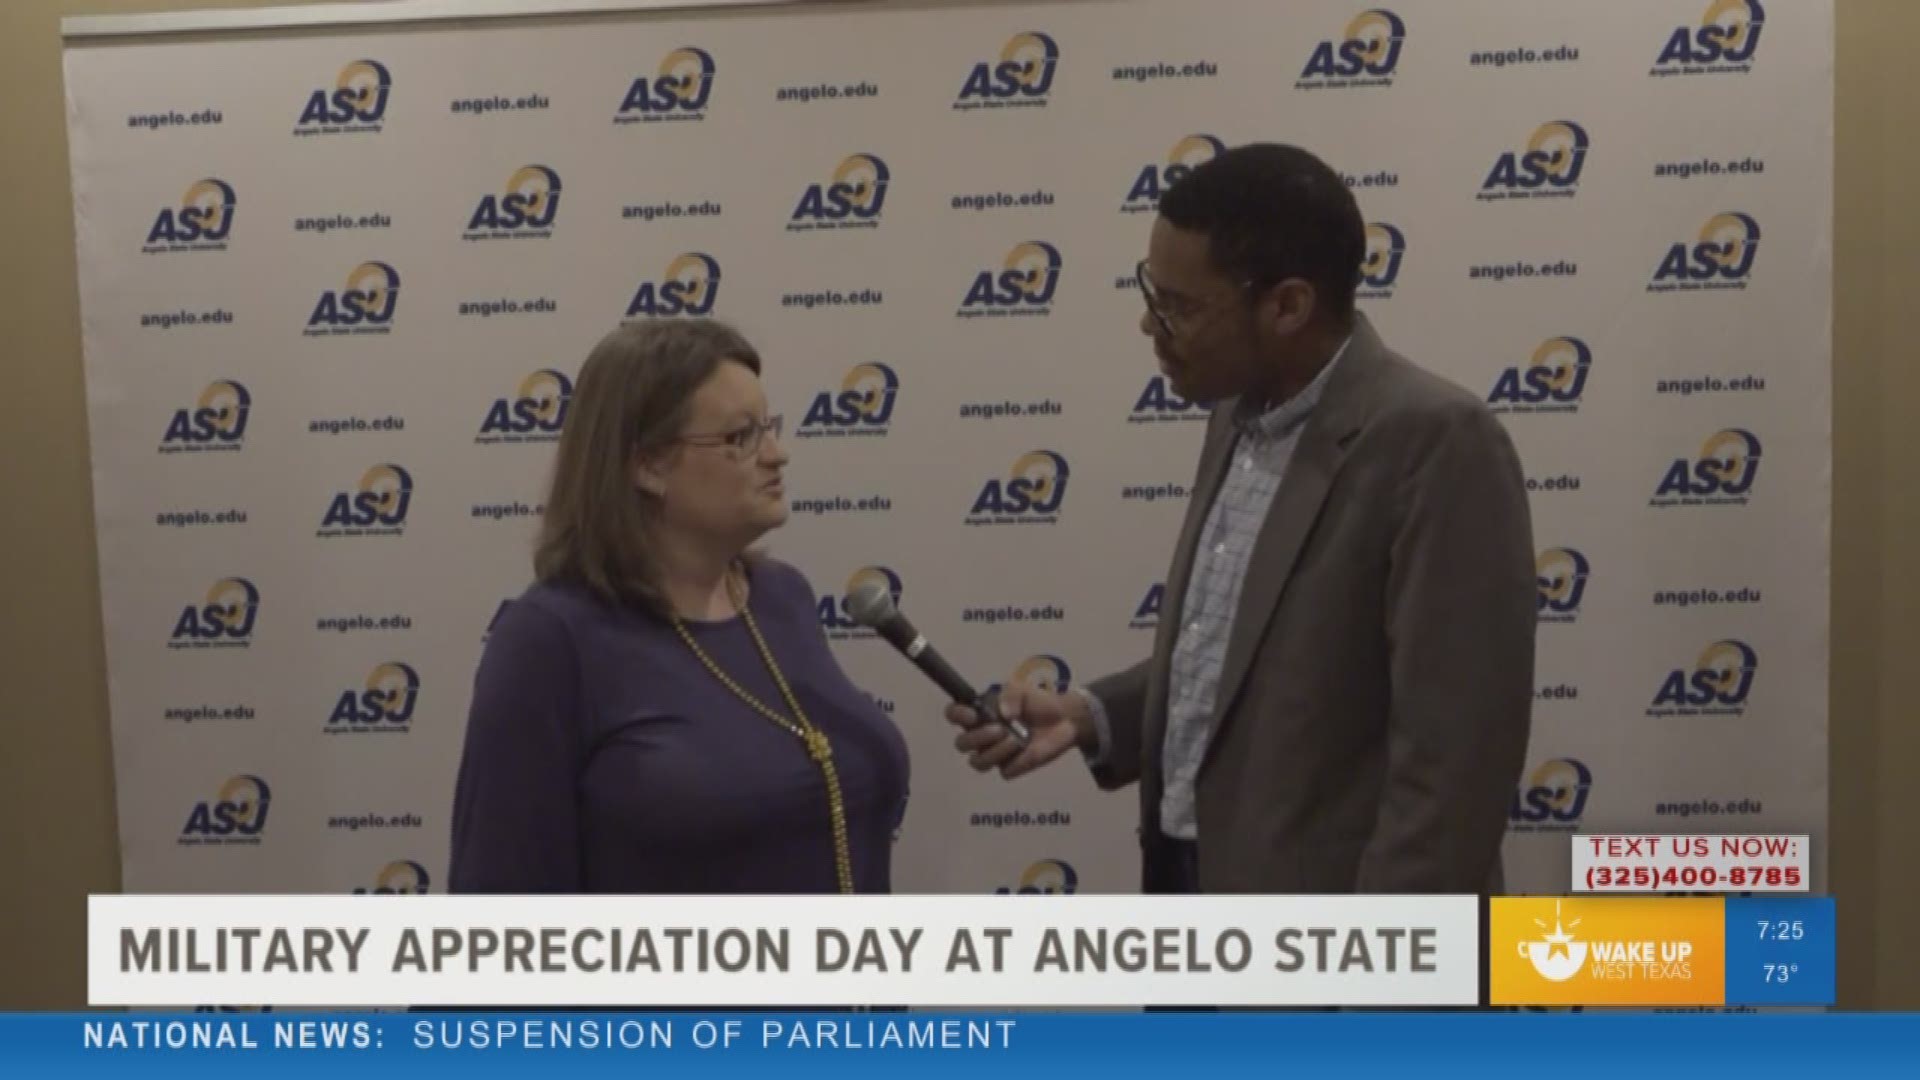 Our Malik Mingo spoke with the director of alumni services at Angelo State University about military appreciation day on September 14 at the LeGrand Alumni and Visitors Center.